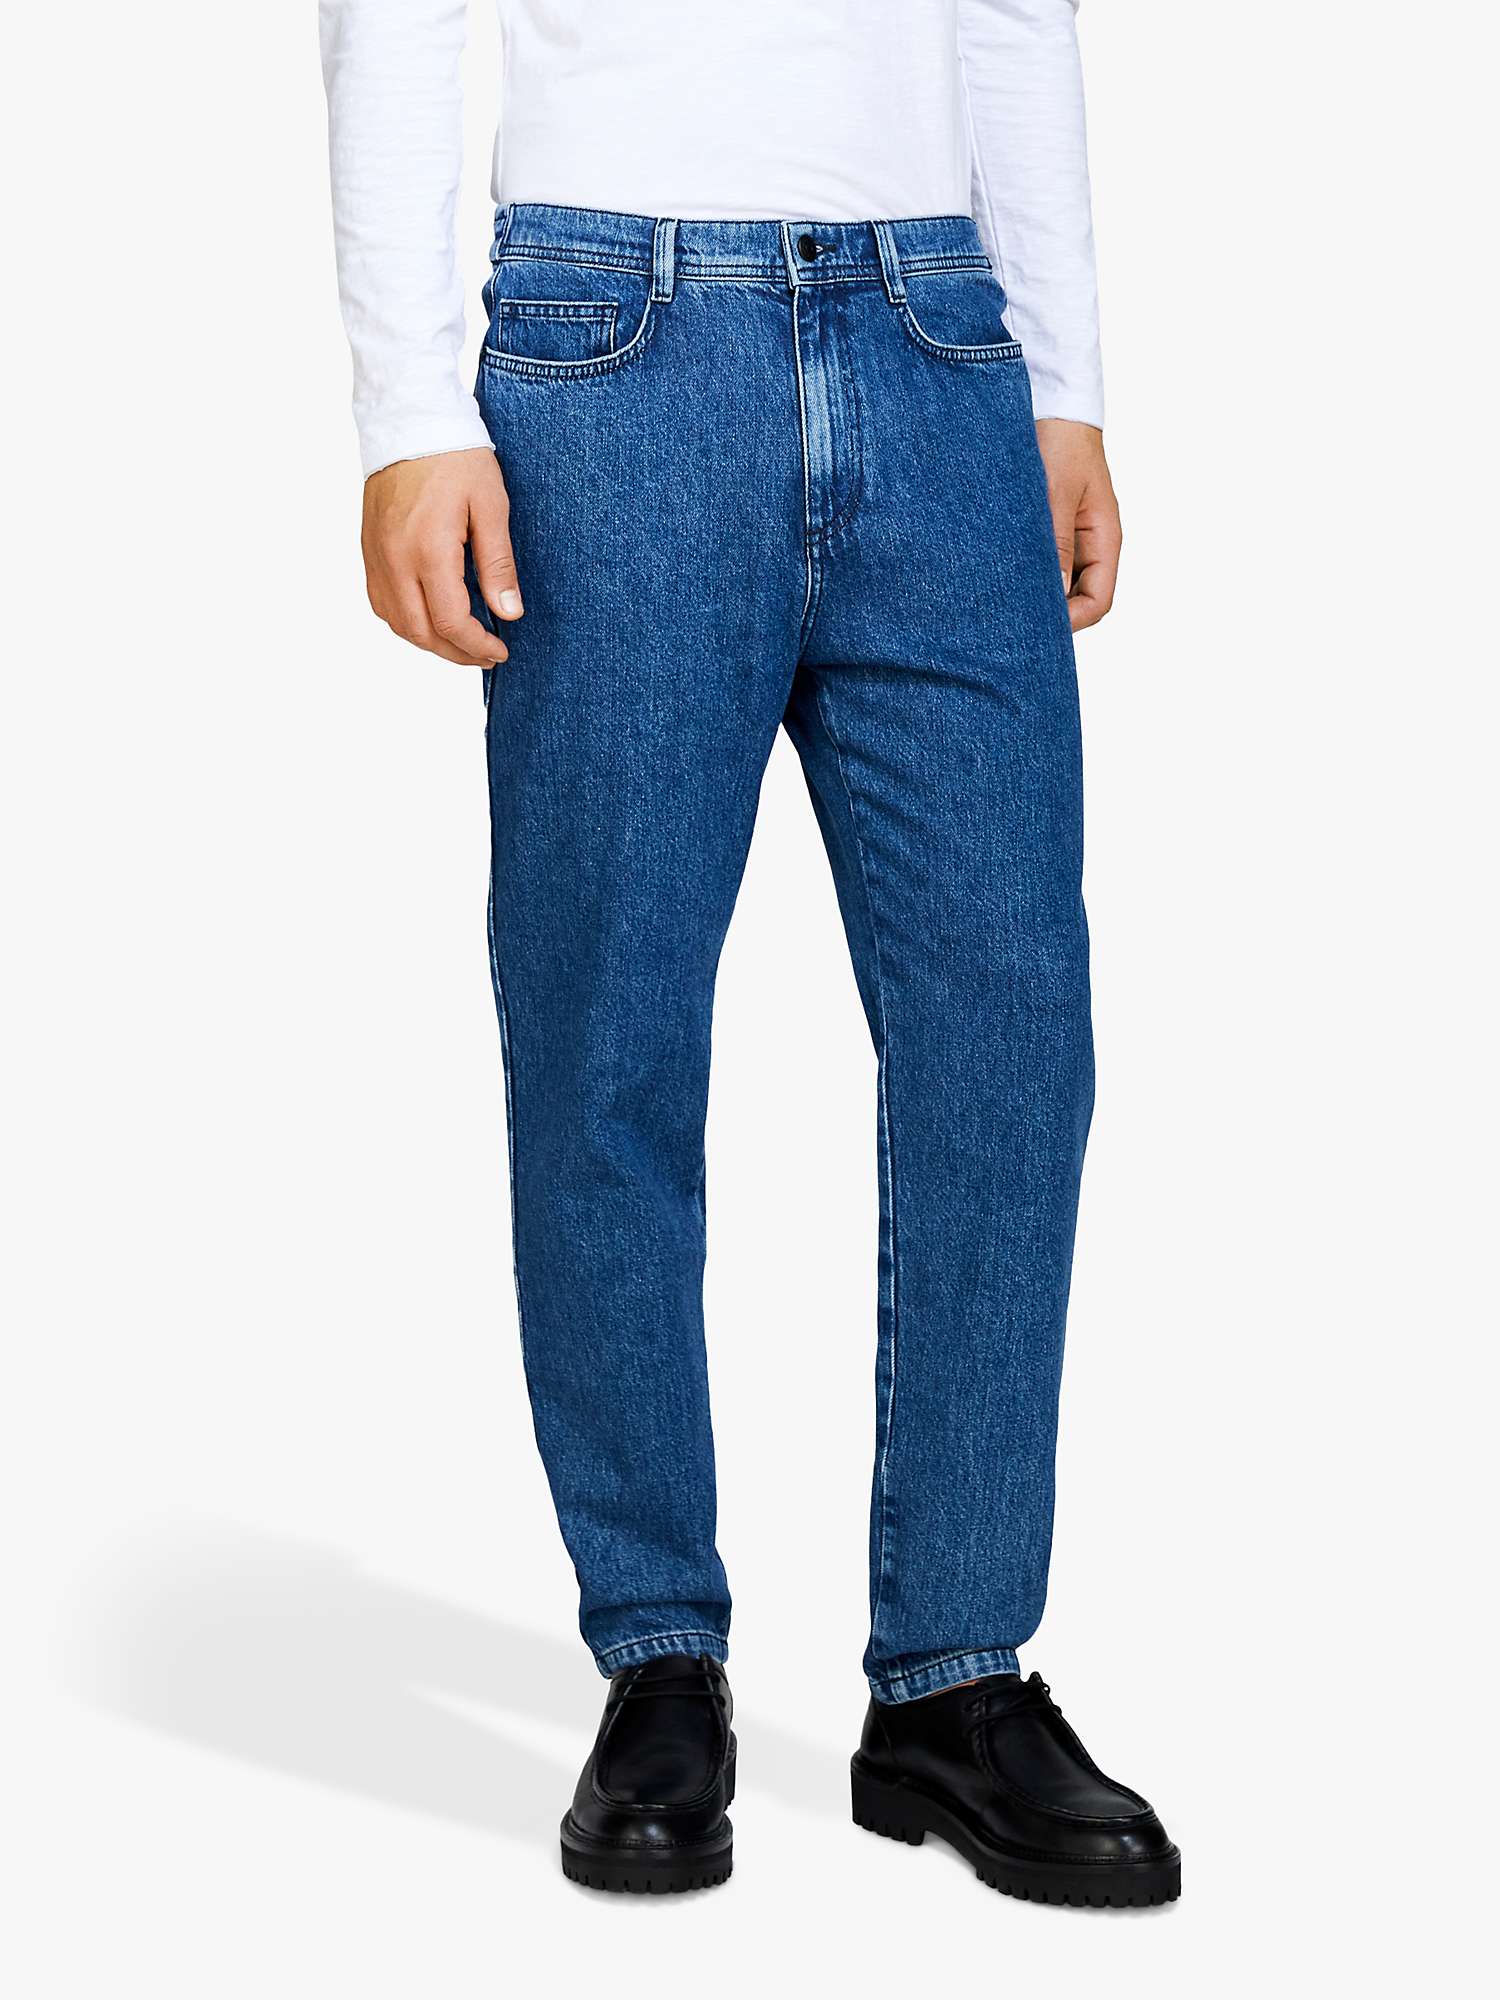 Buy SISLEY Relaxed Fit Jeans, Blue Online at johnlewis.com